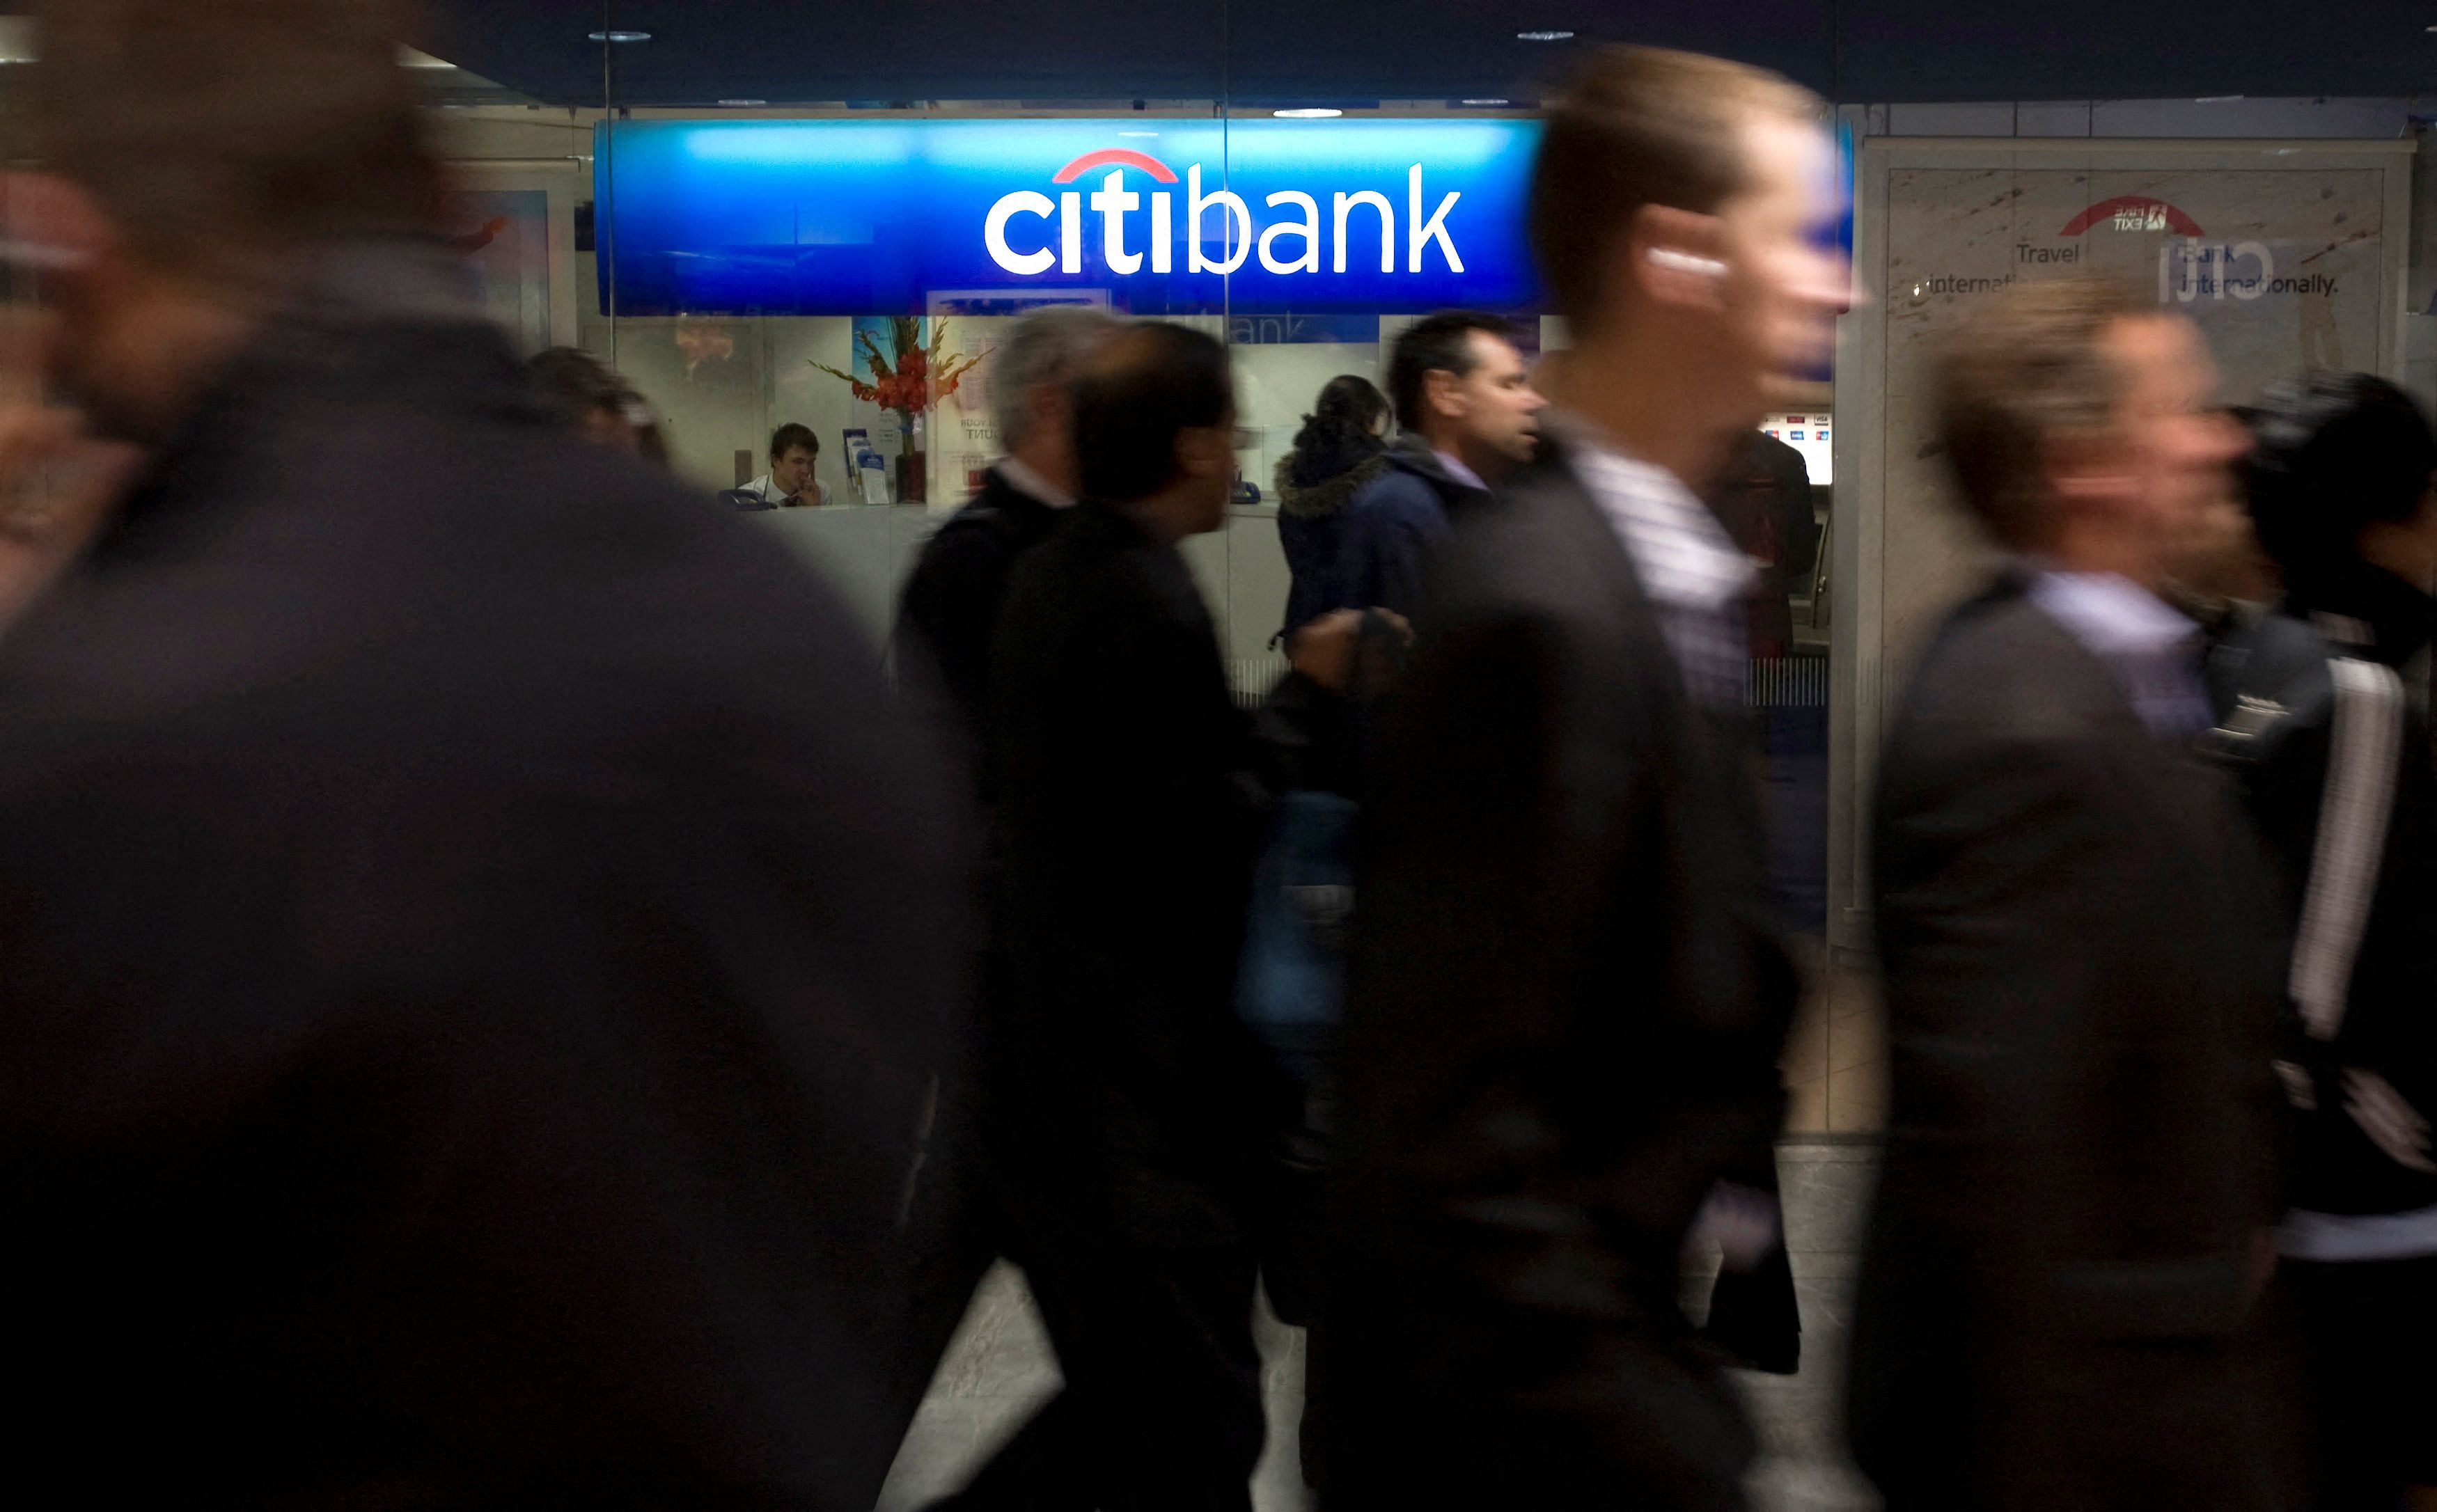 People walk past a Citibank branch during the lunchtime rush in London's financial district of Canary Wharf